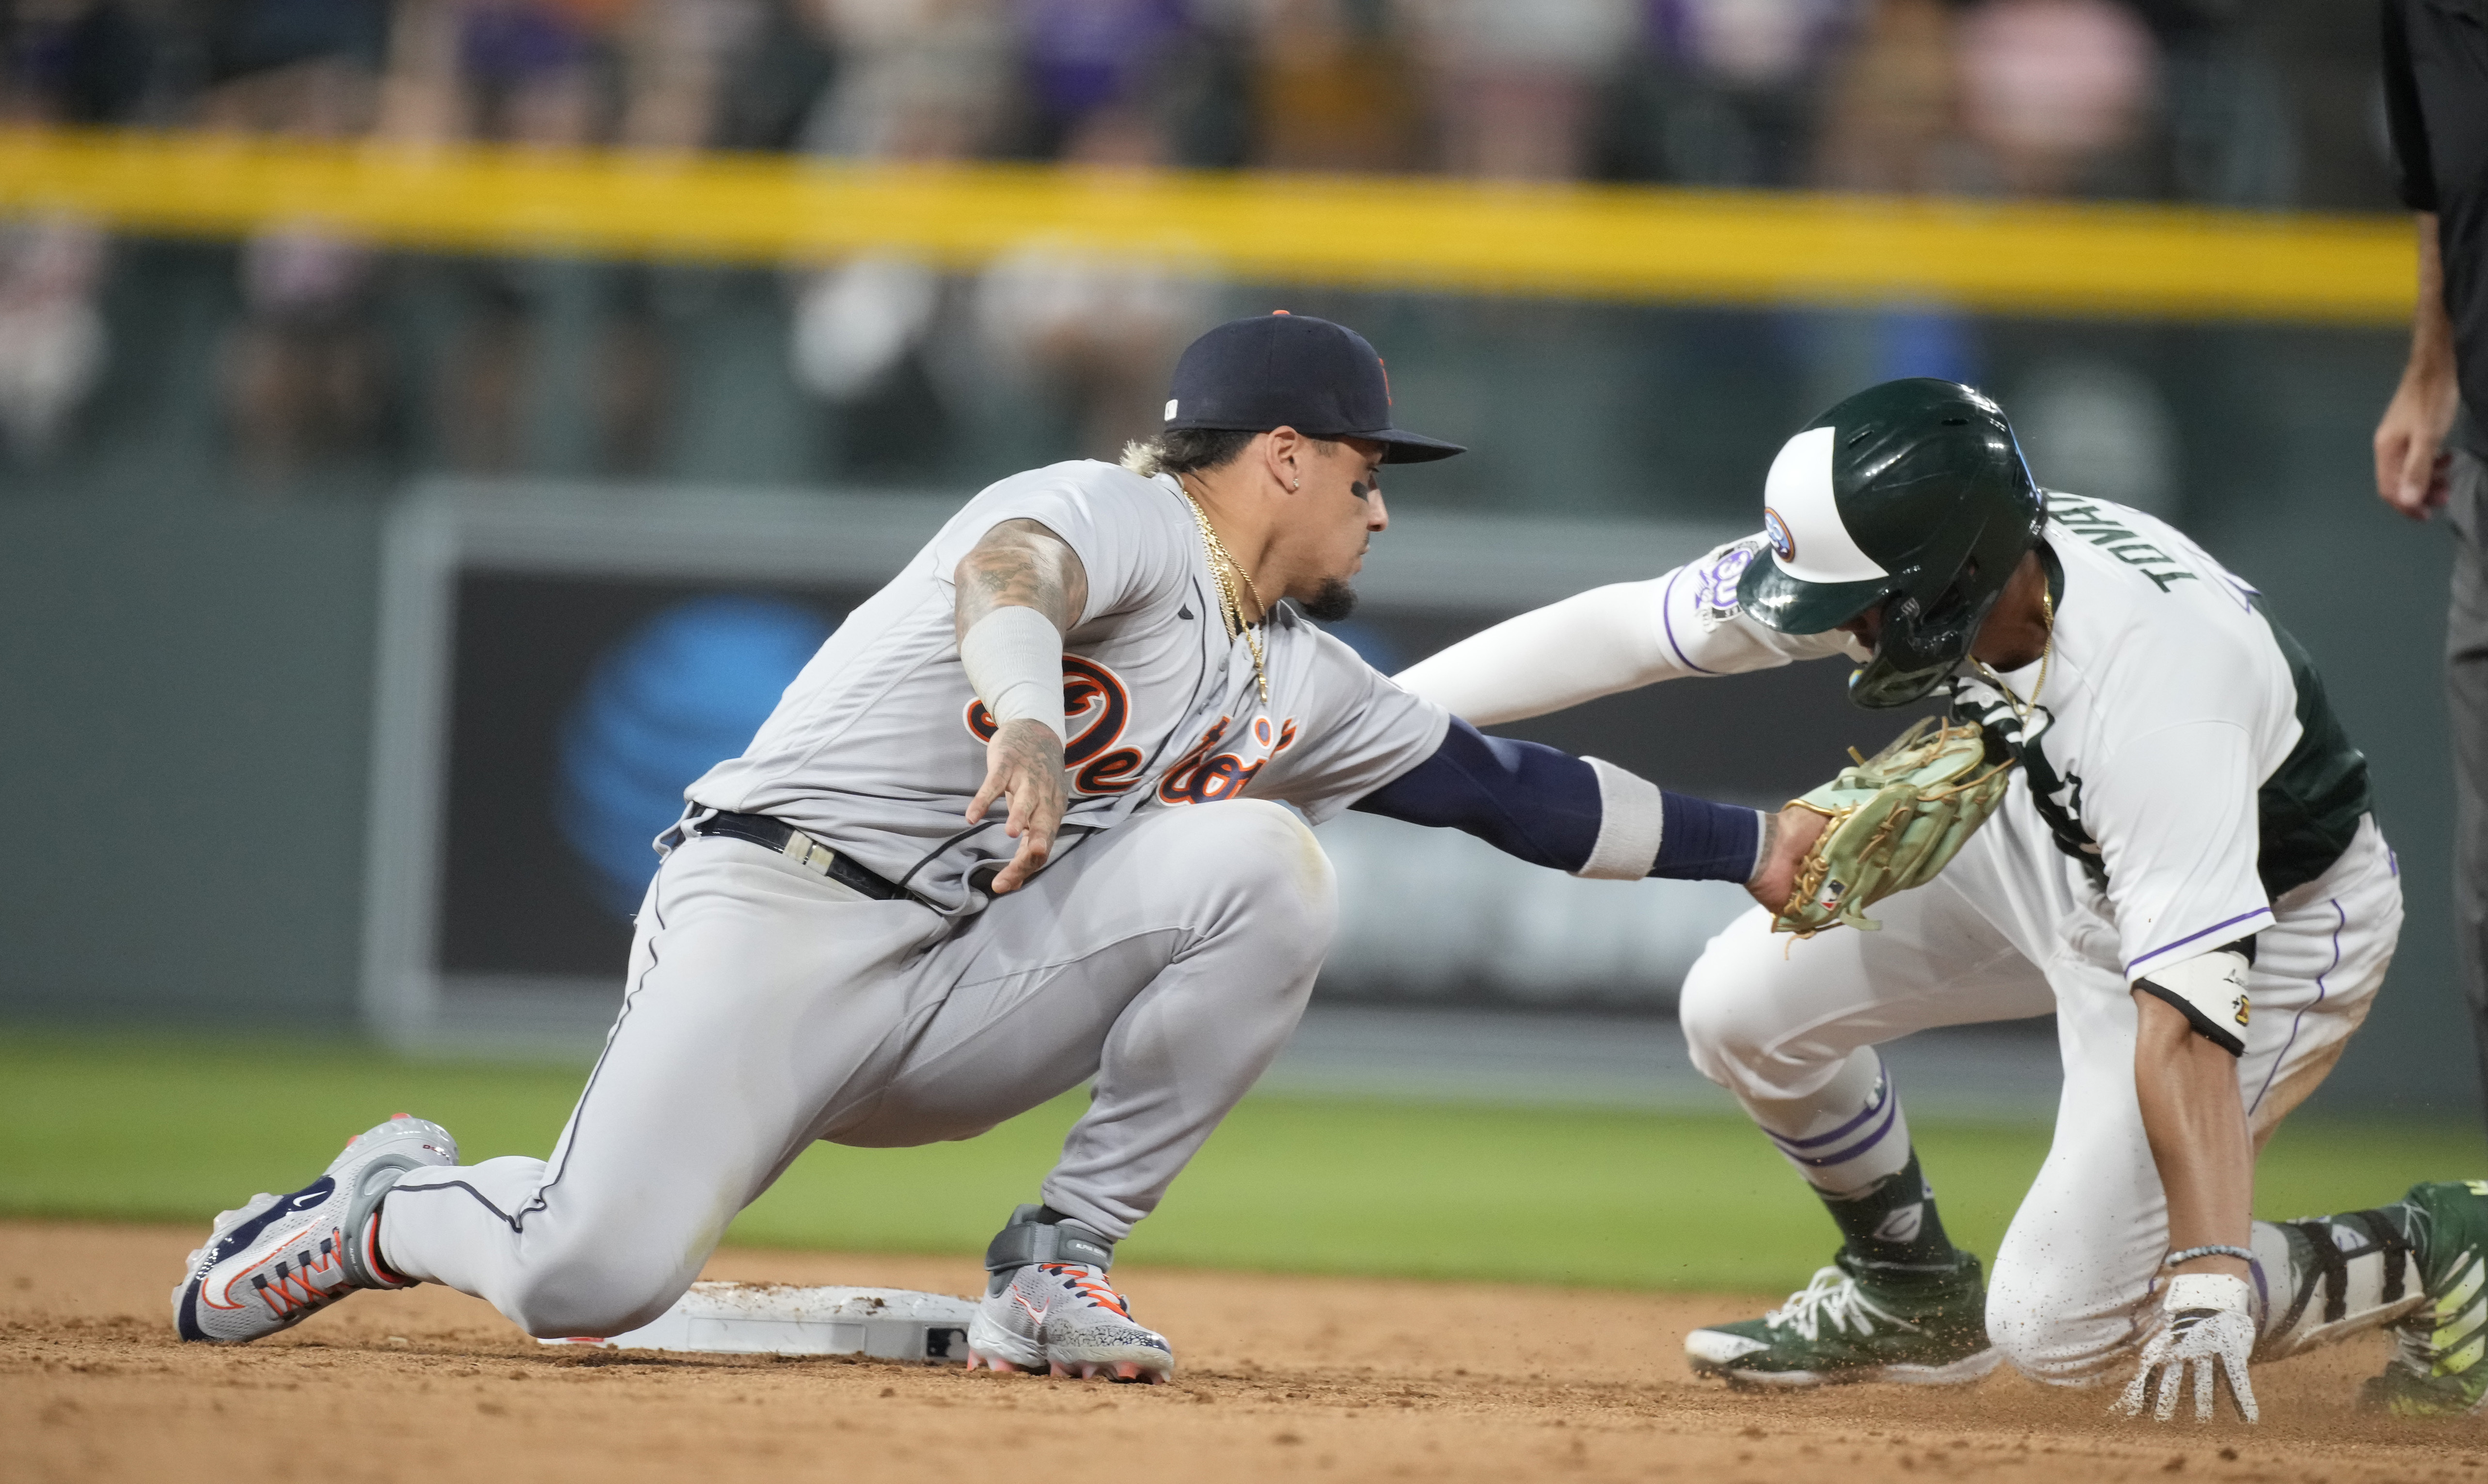 How to Watch the Detroit Tigers vs